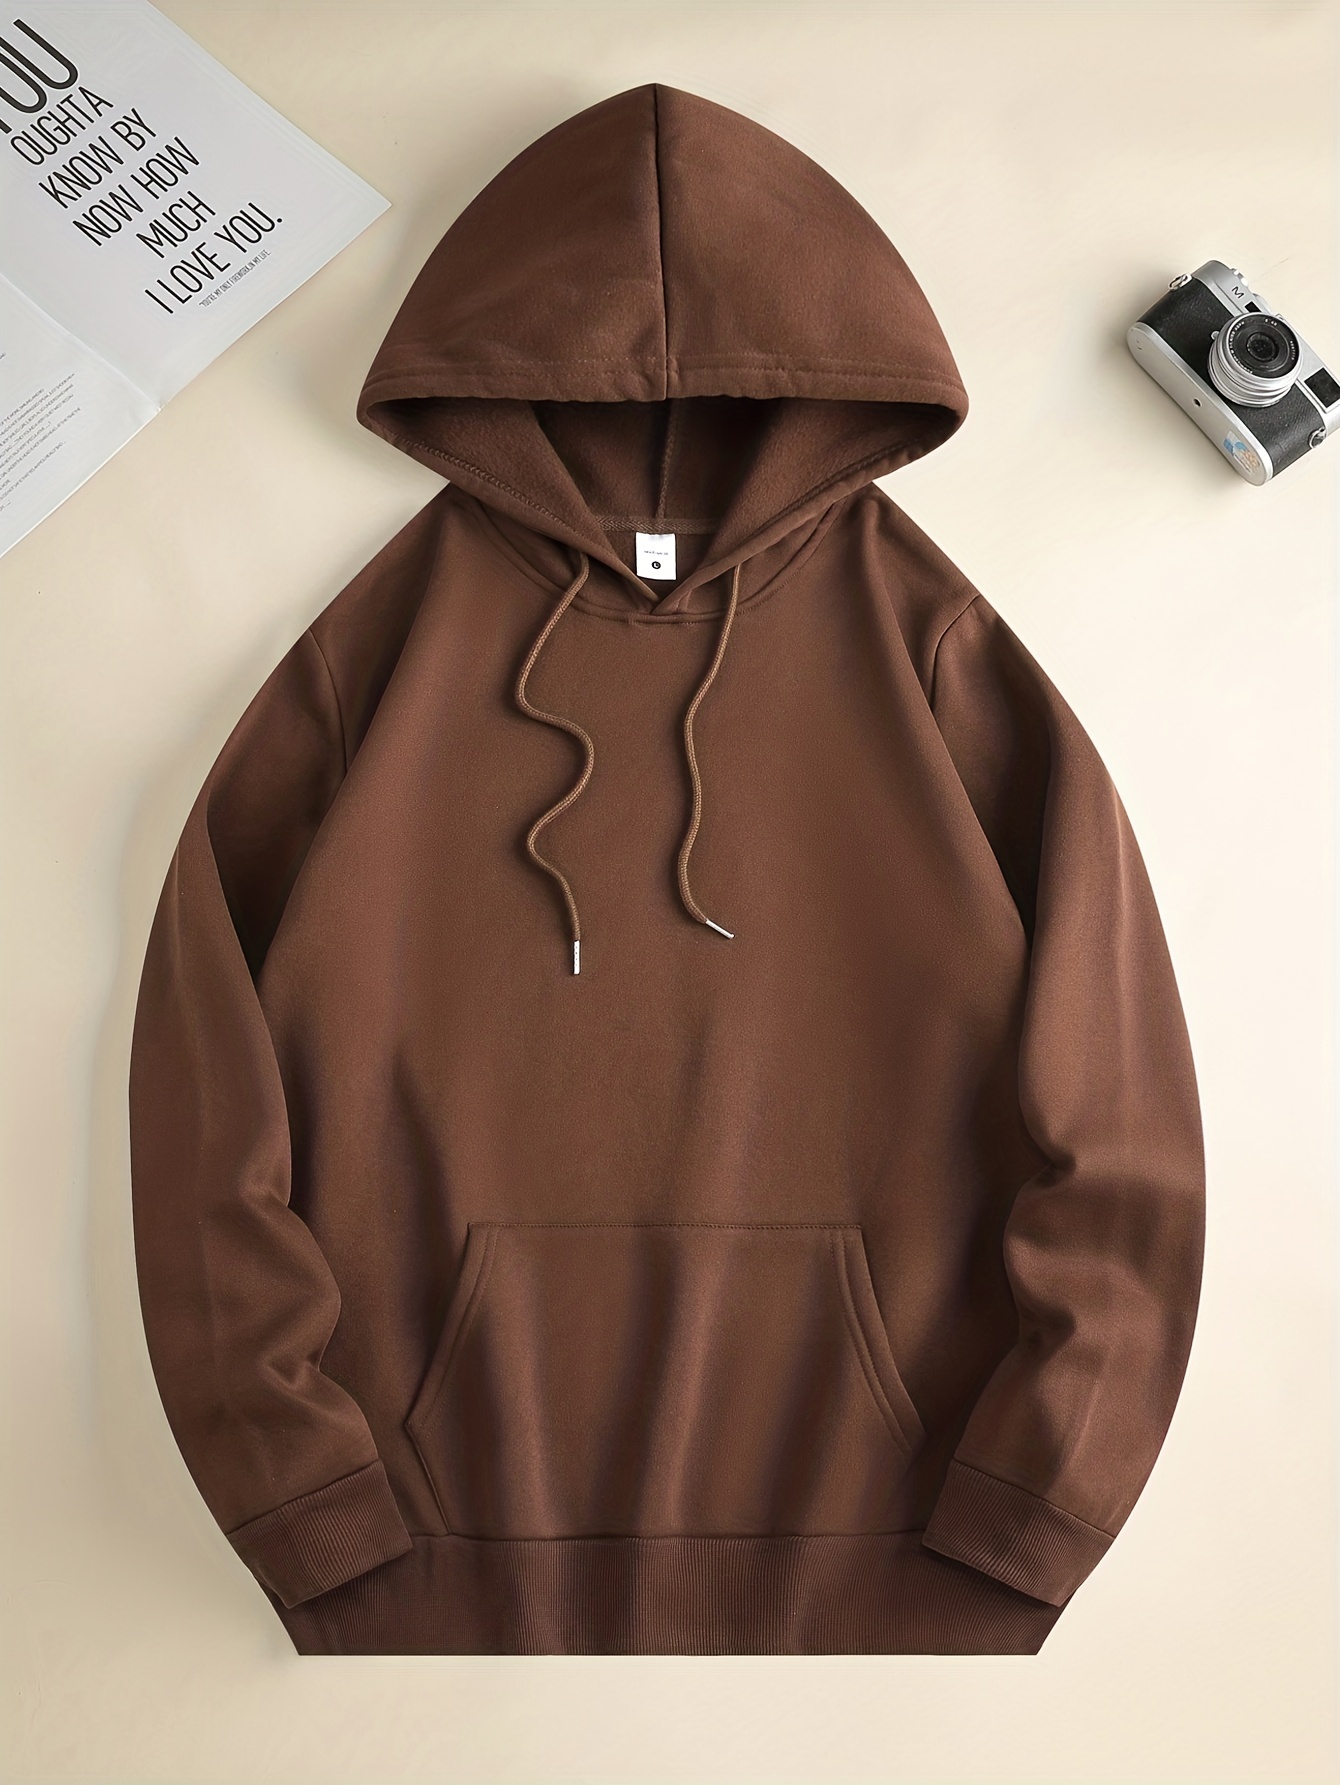 solid color hoodies for men hoodie with kangaroo pocket comfy loose trendy hooded pullover mens clothing for autumn winter details 6